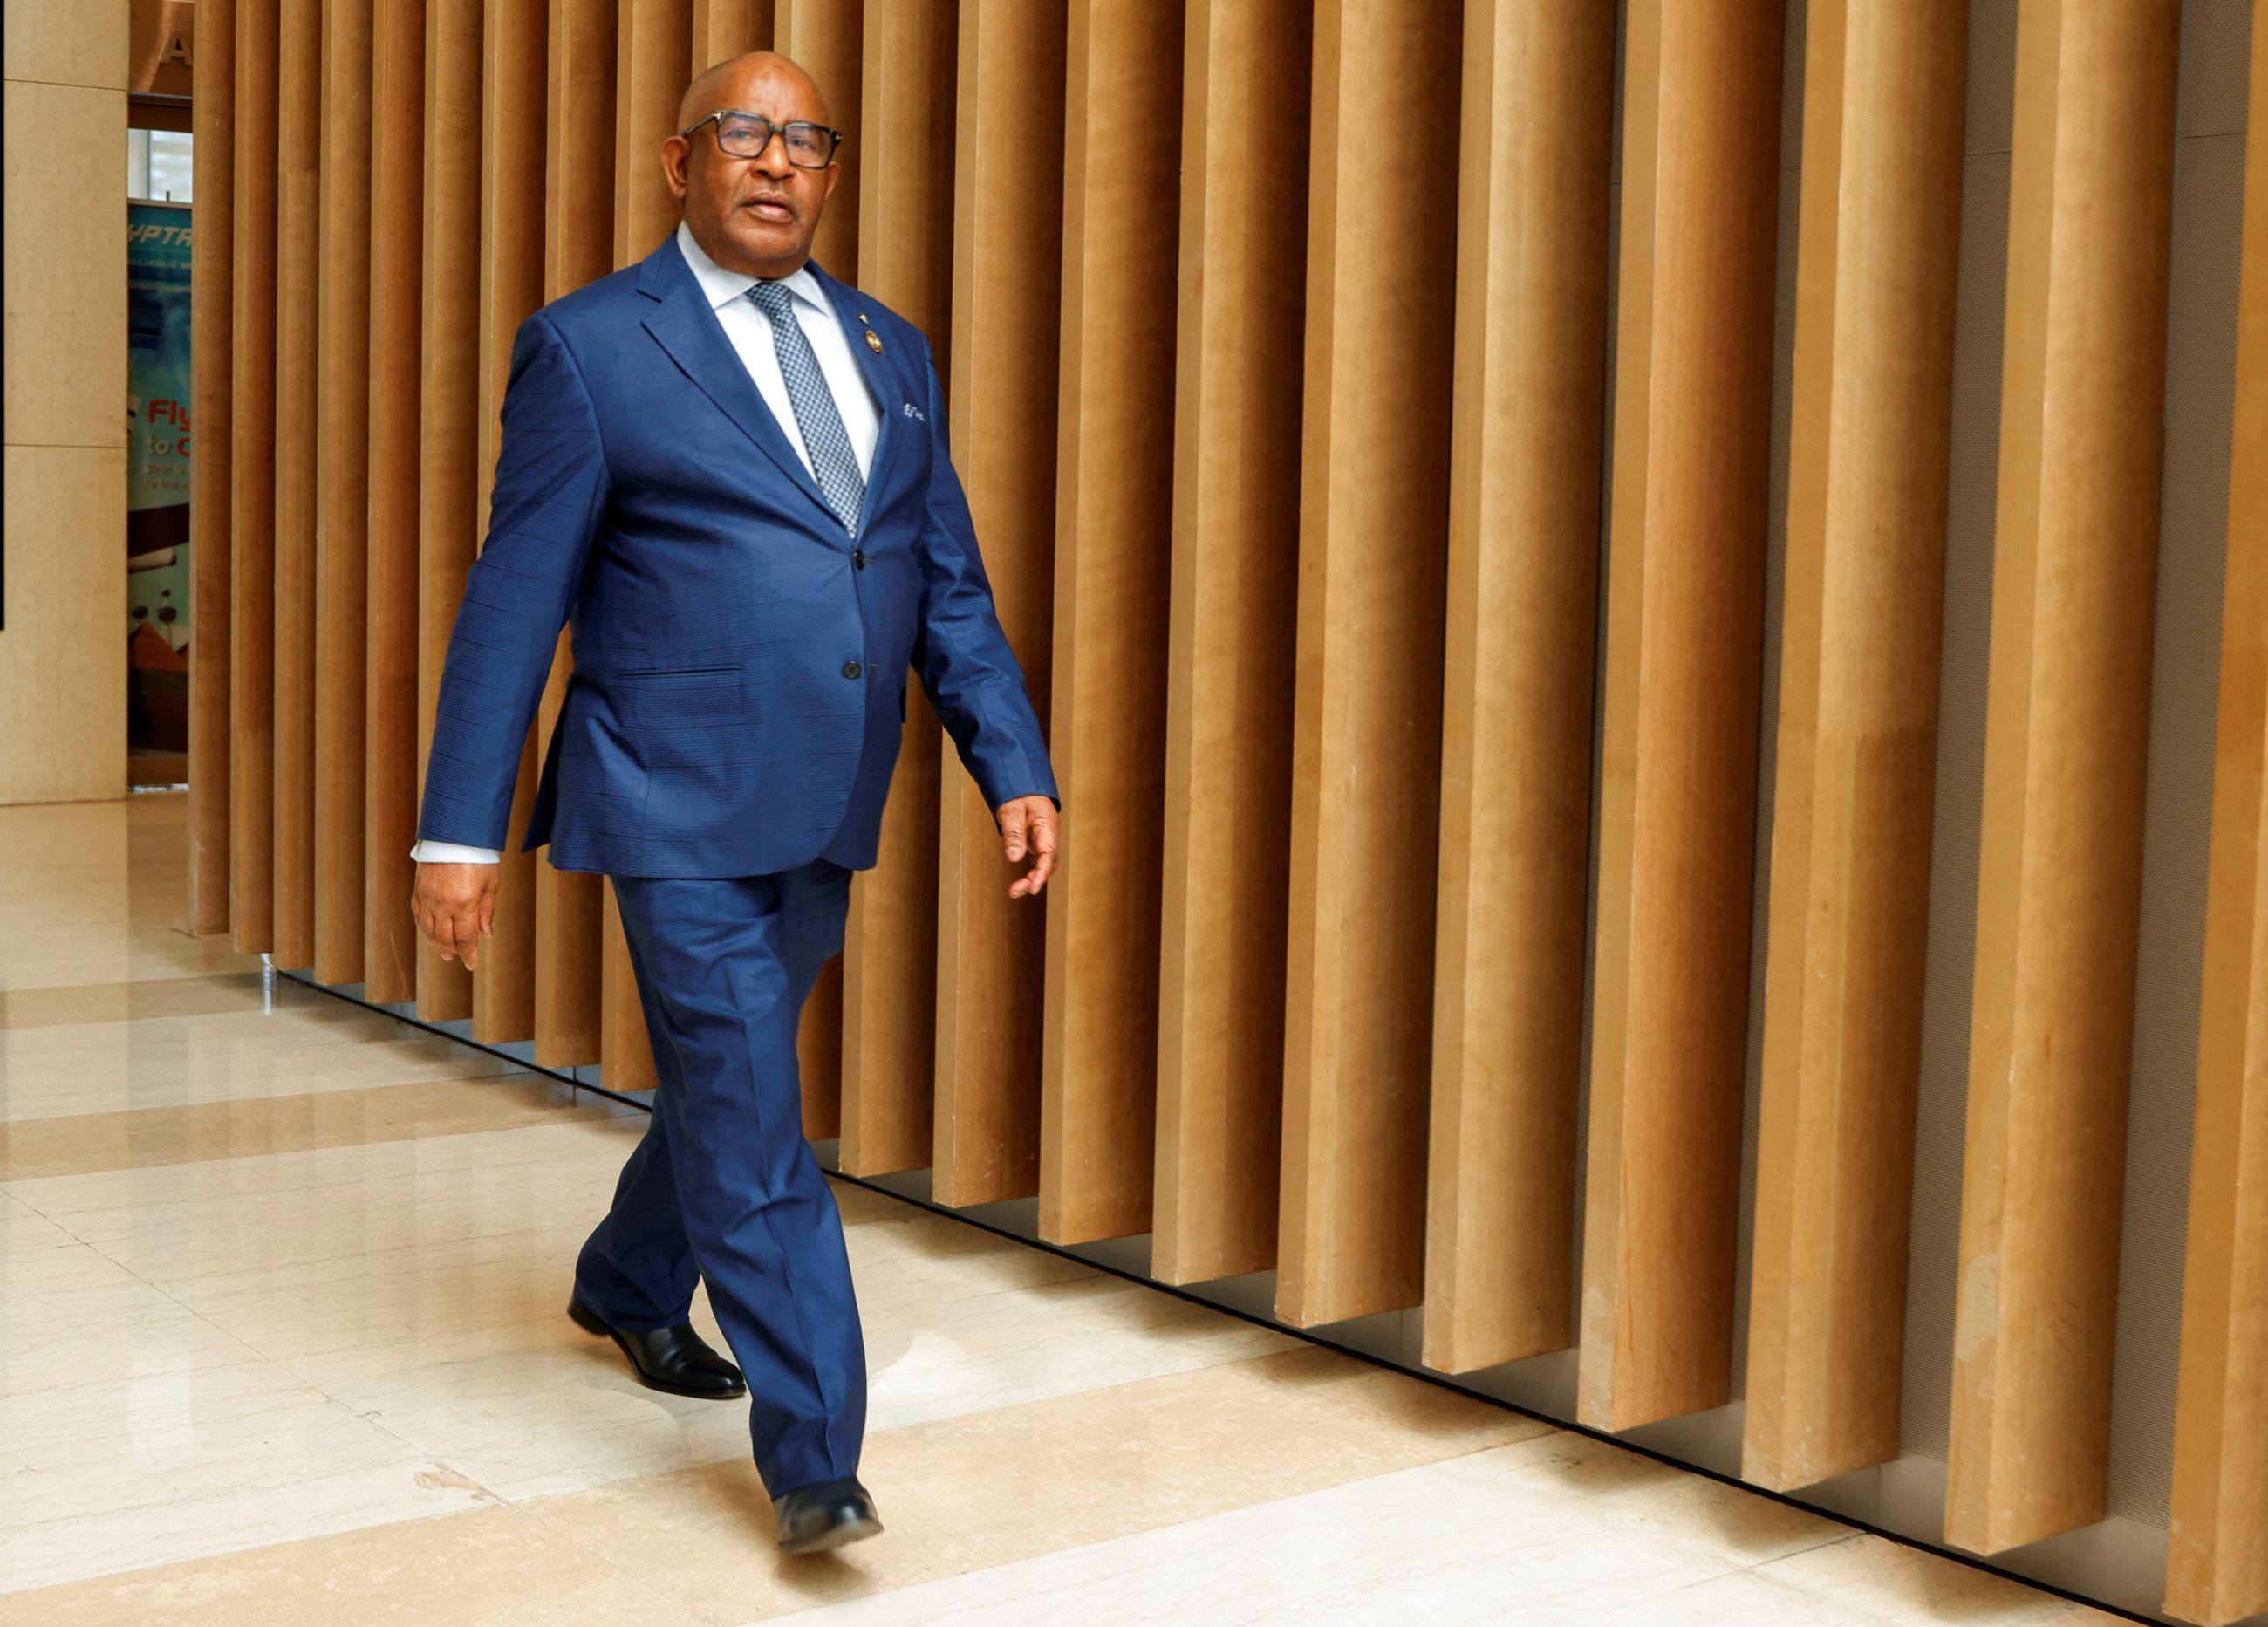 DOCUMENT DATE:  February 19, 2023  Azali Assoumani President of the Union of Comoros and the incoming African Union Chairperson arrives for the 36th Ordinary Session of the Assembly of the Africa Union at the African Union Headquarters in Addis Ababa, Ethiopia February 19, 2023.